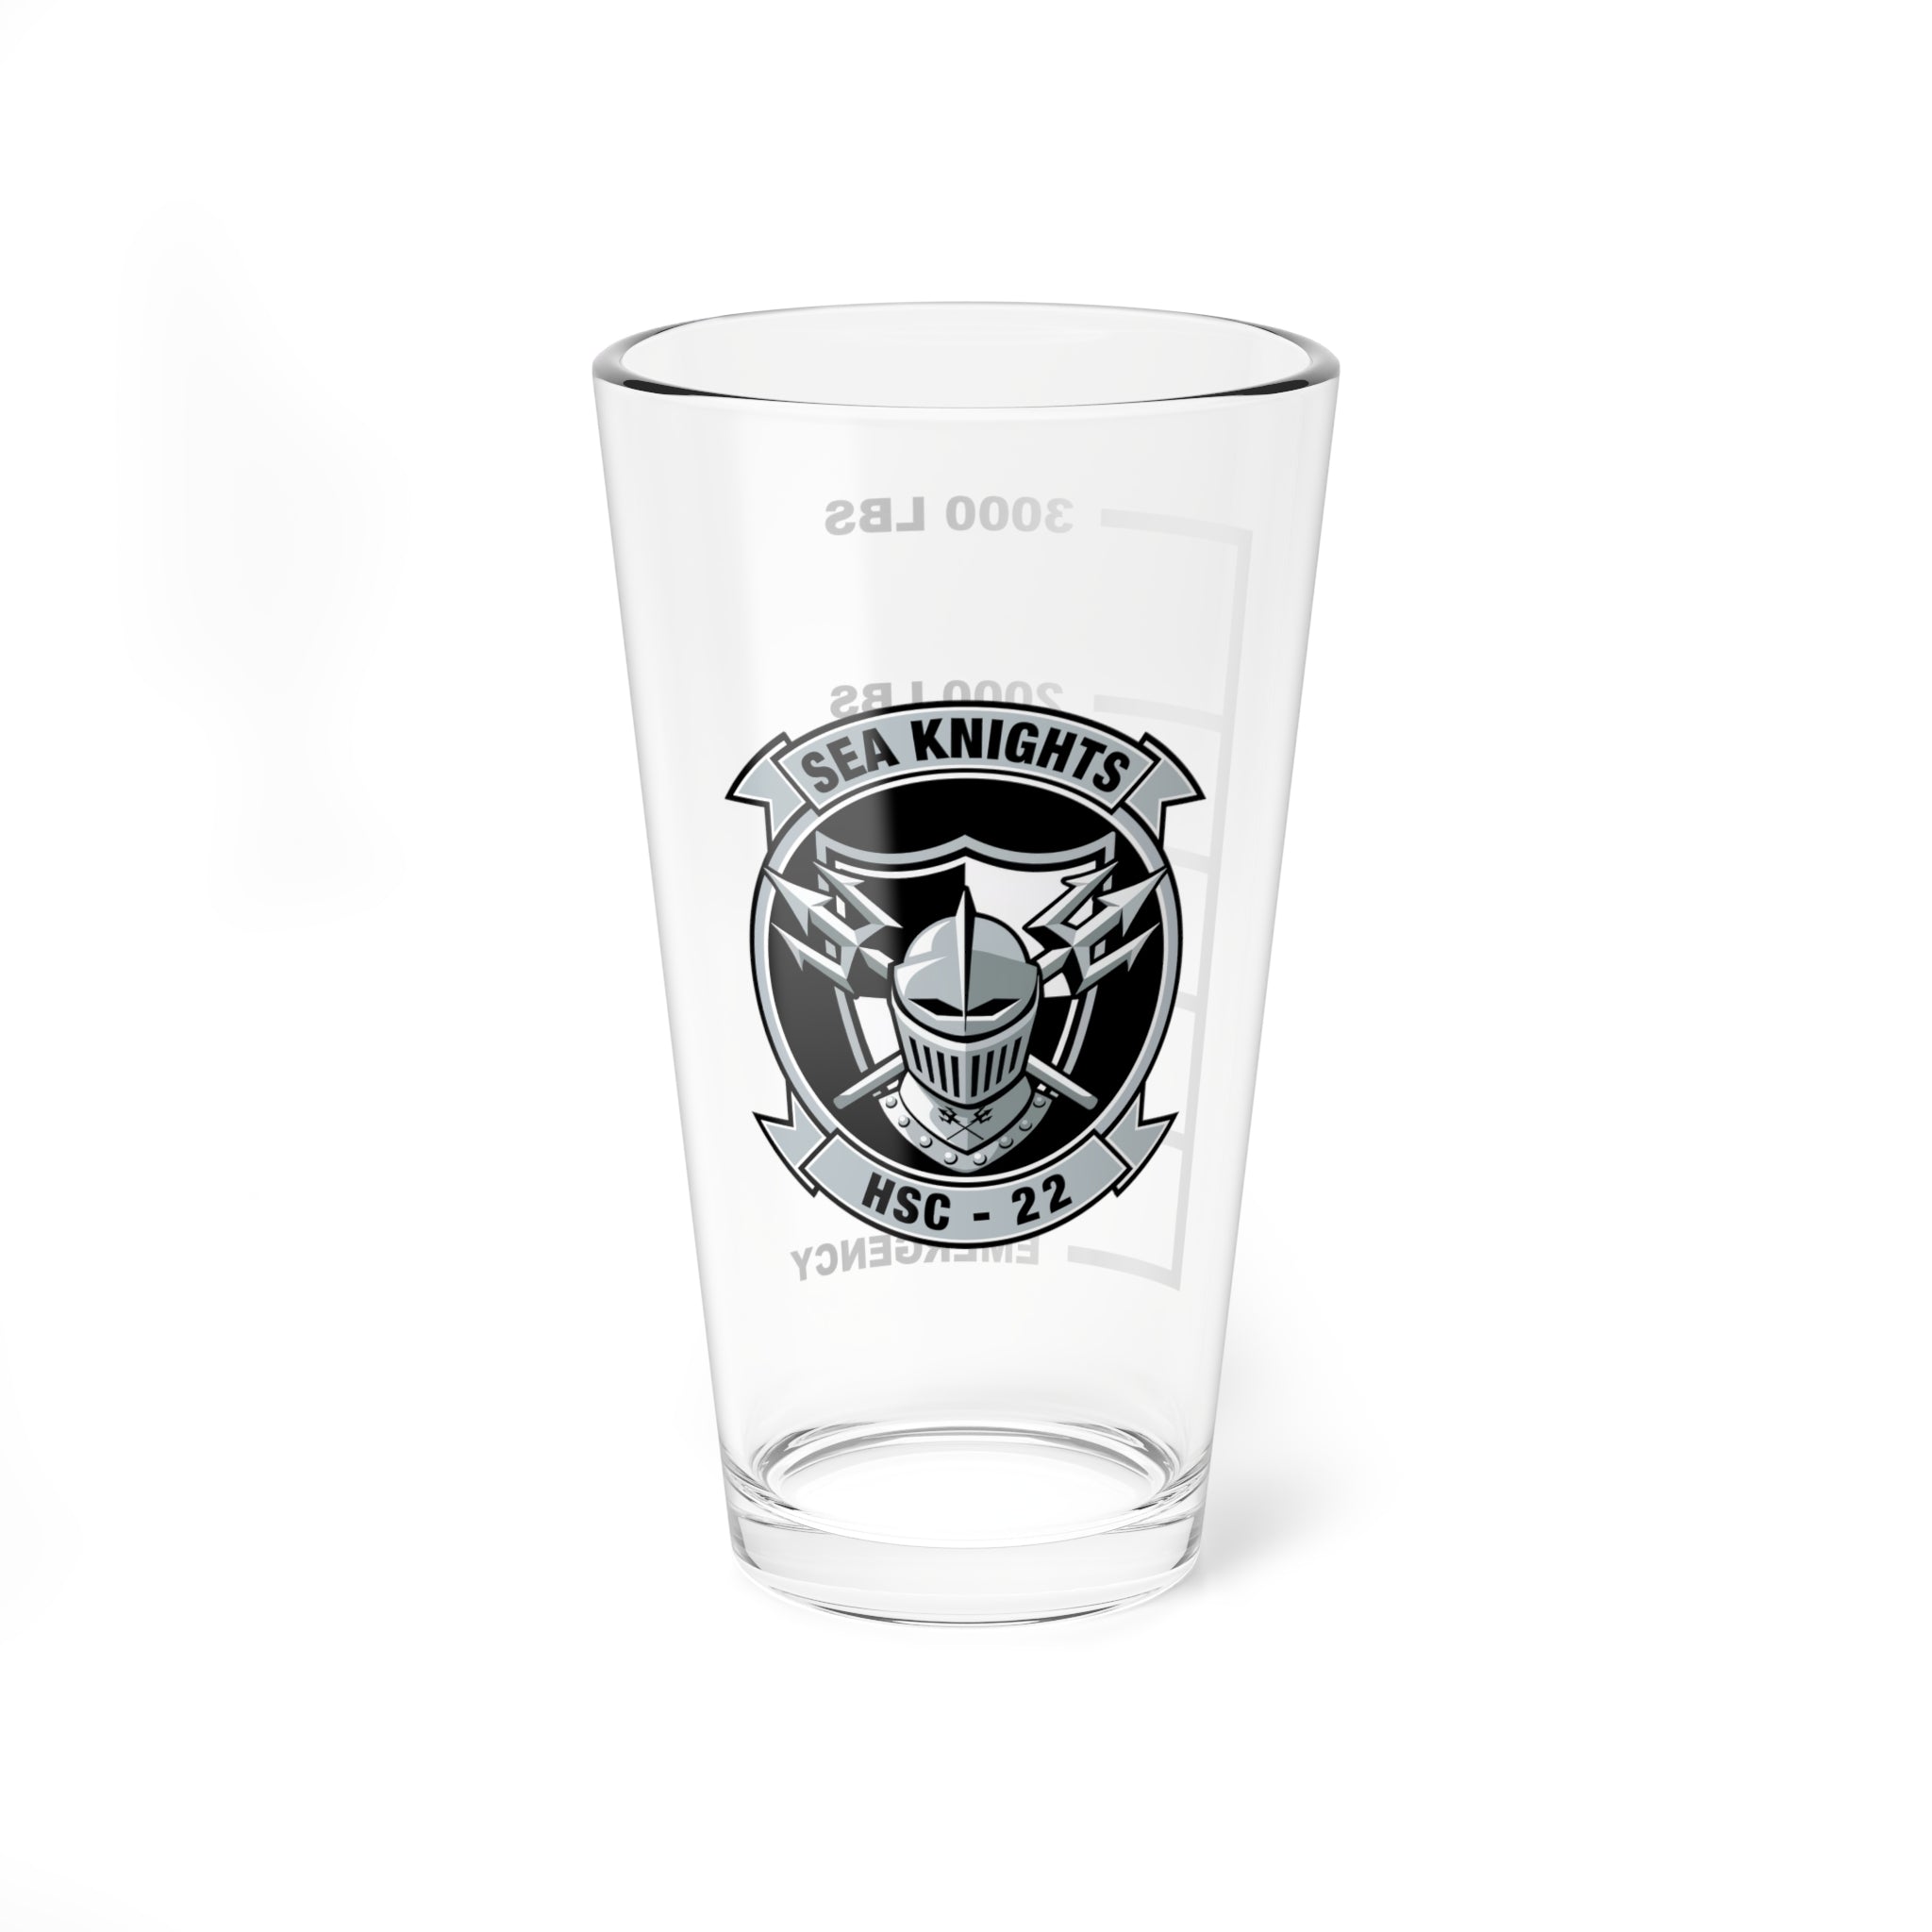 HSC-22 "Sea Knights" Fuel Low Pint Glass, Navy Helicopter Fleet Support Squadron flying the MH-60S